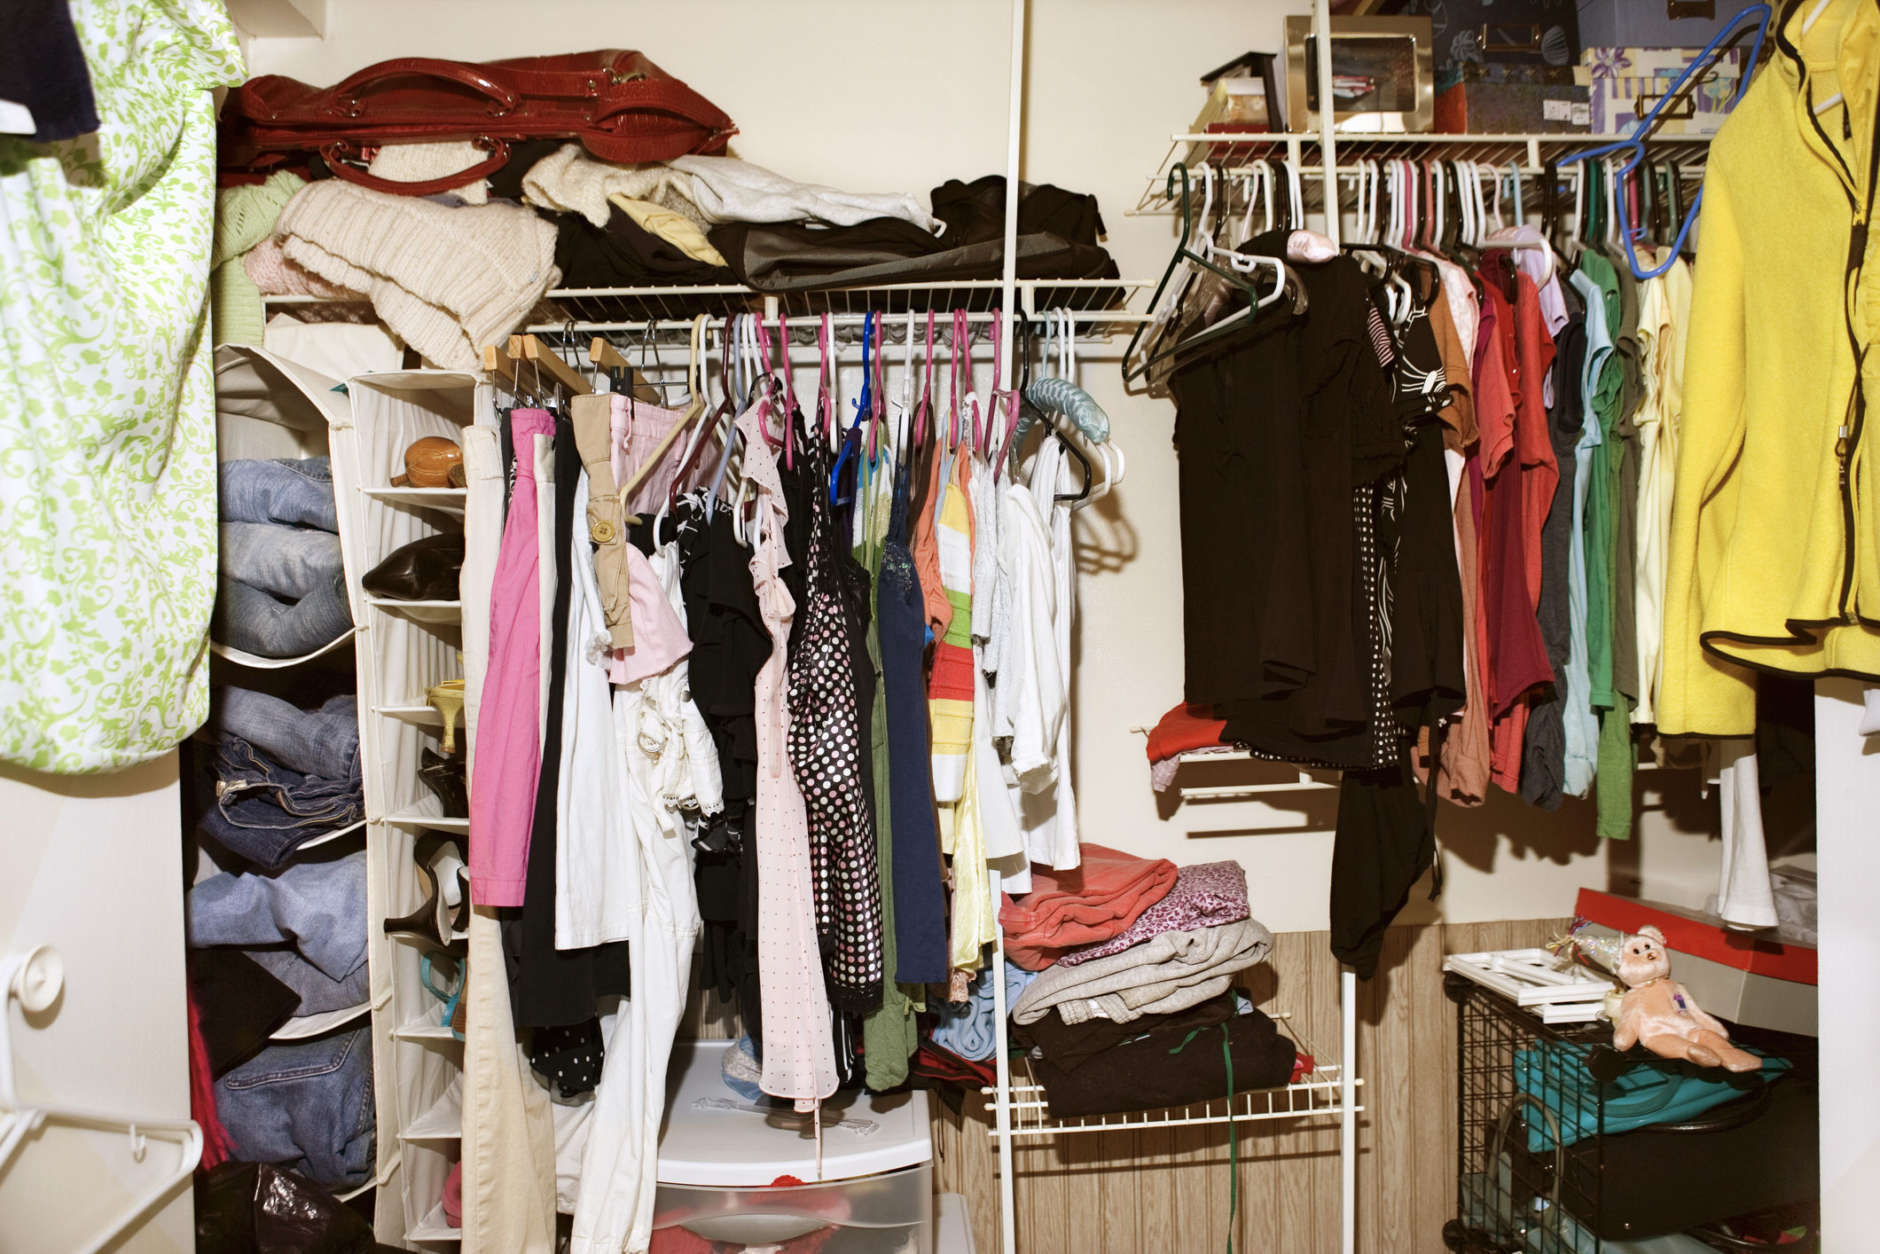 Clothes in woman's closet